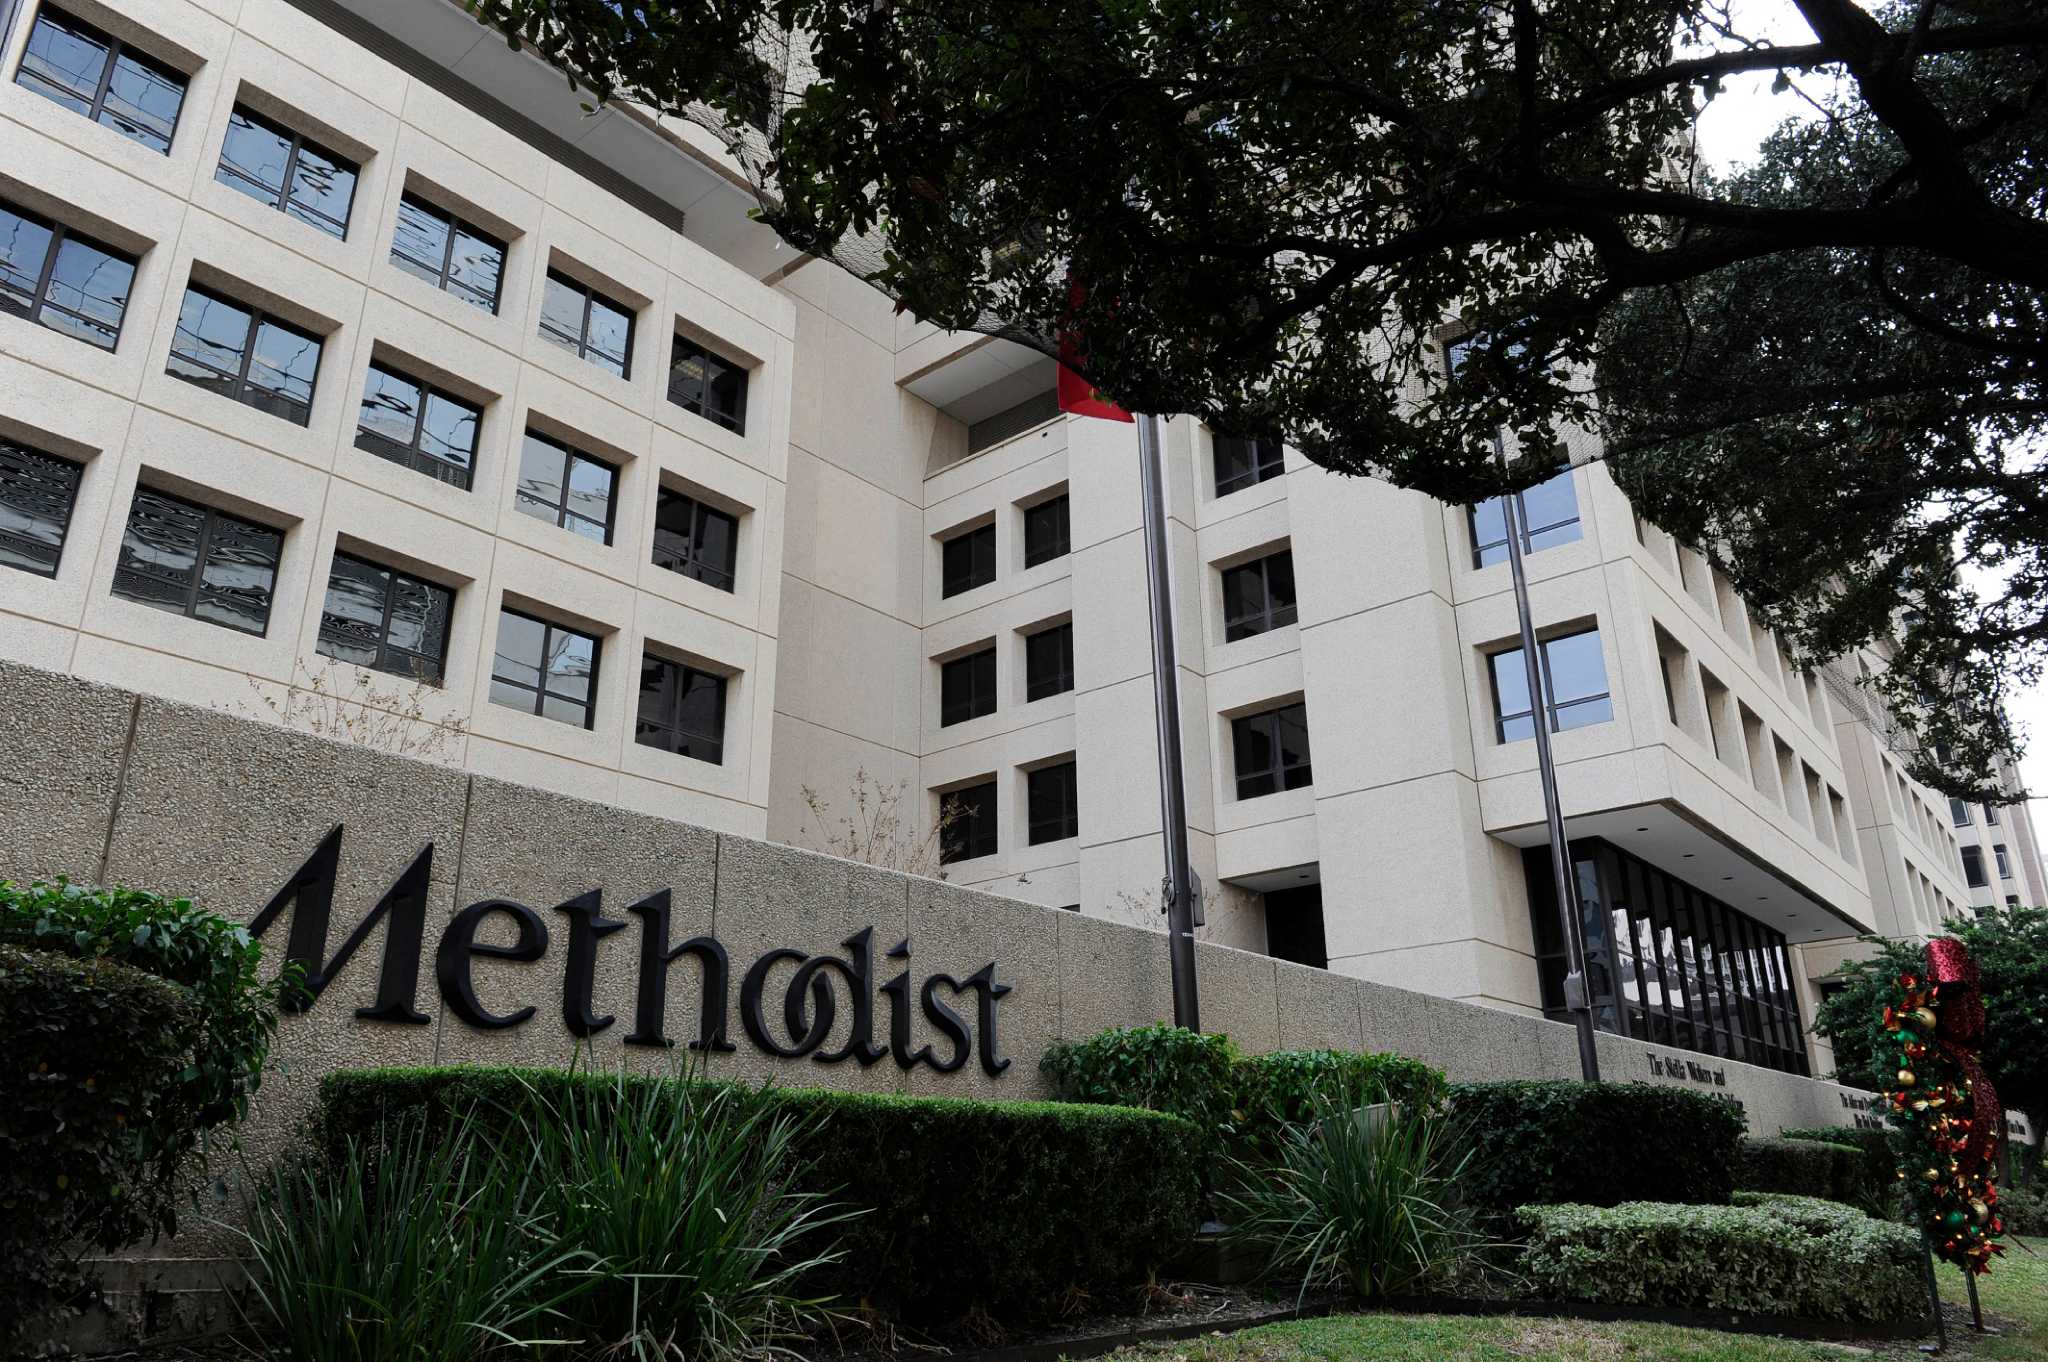 Methodist Hospital sued over alleged secret taping of patient calls